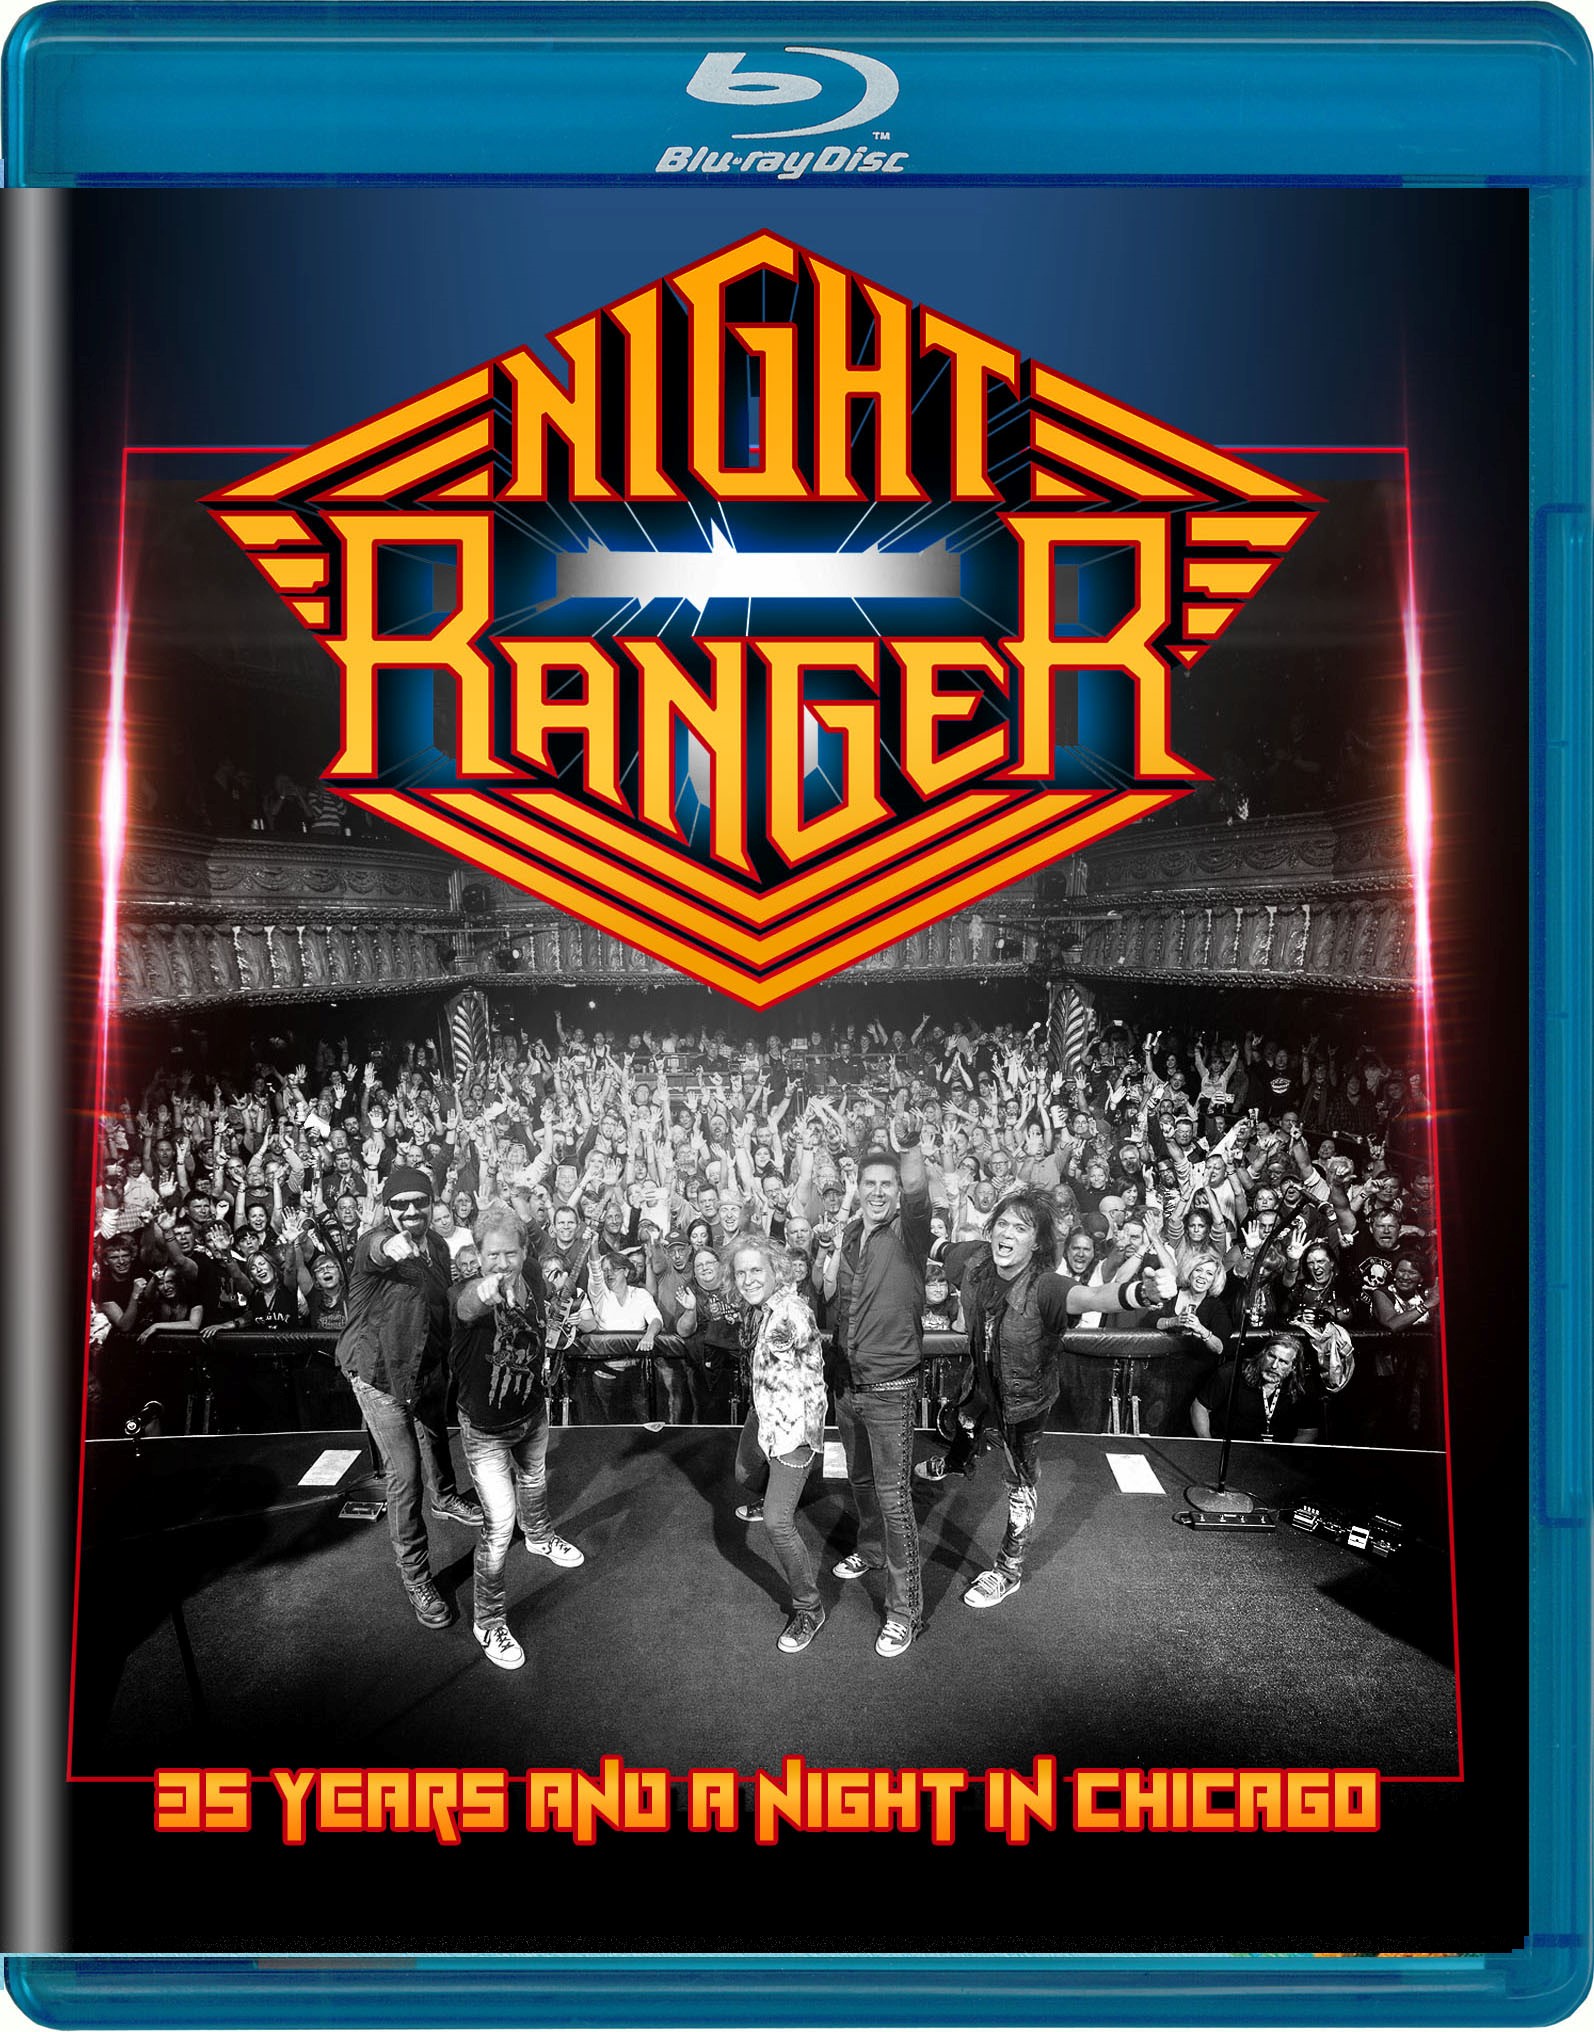 NIGHT RANGER - 35 Years and a Night in Chicago (Blu Ray)